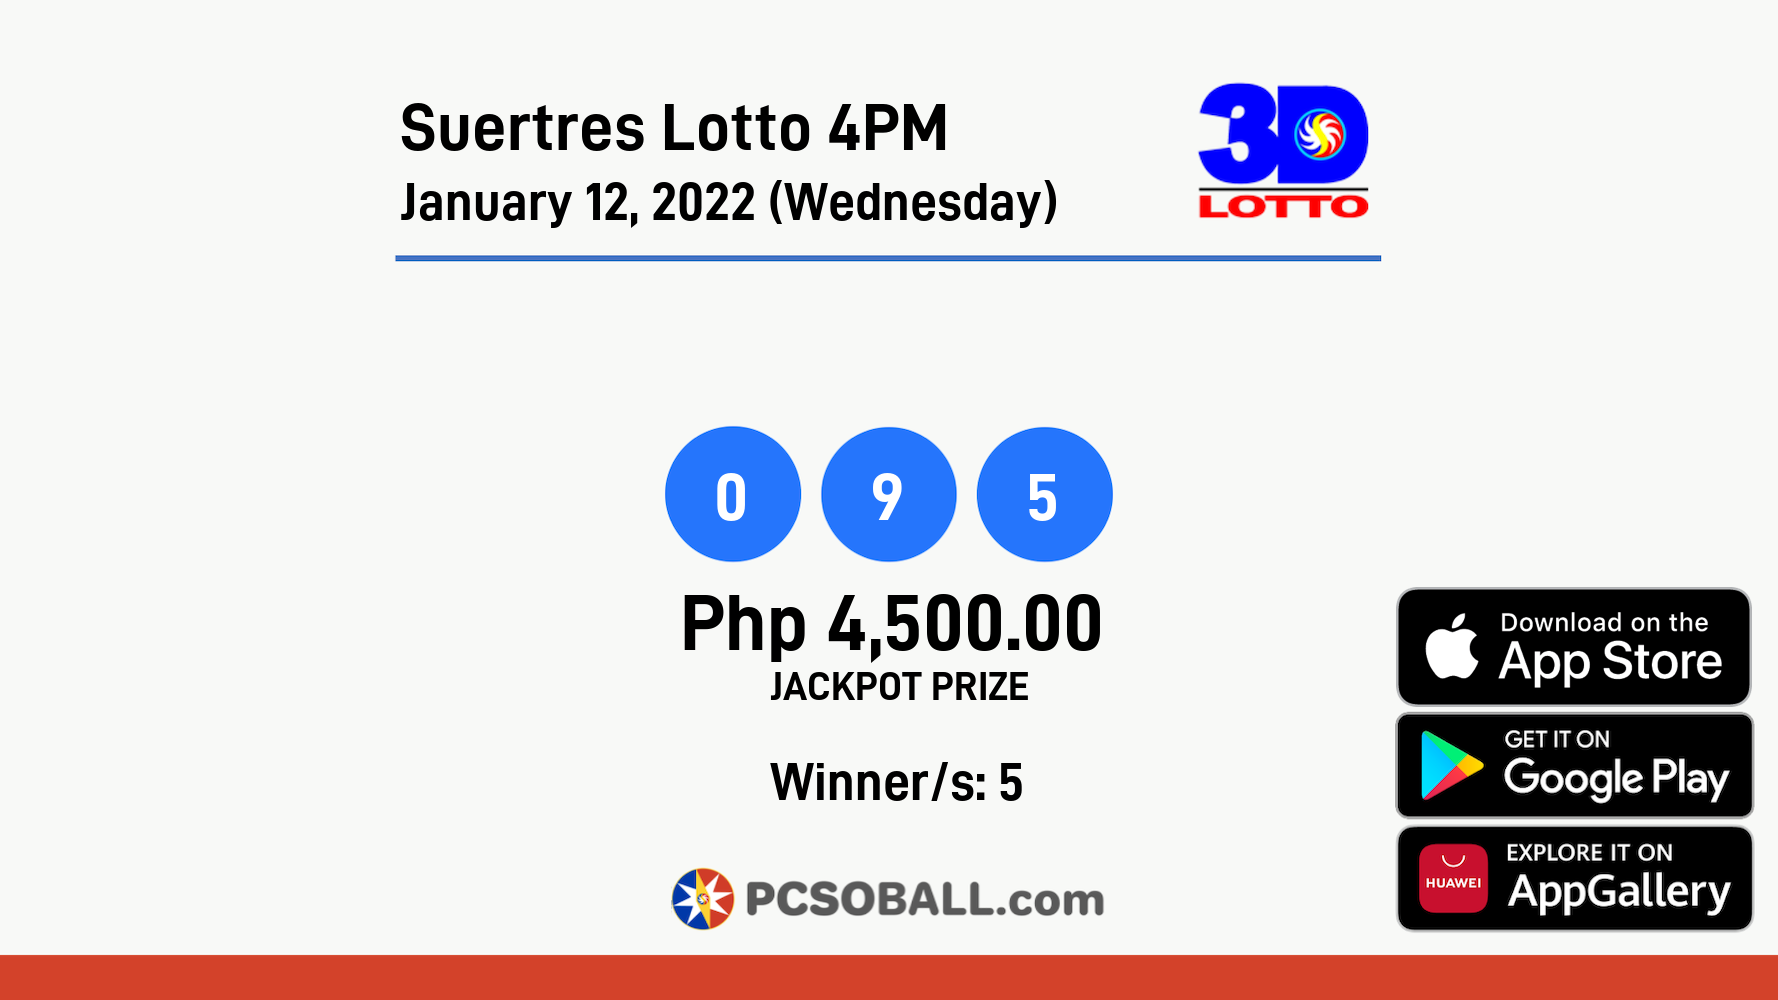 Suertres Lotto 4PM January 12, 2022 (Wednesday) Result